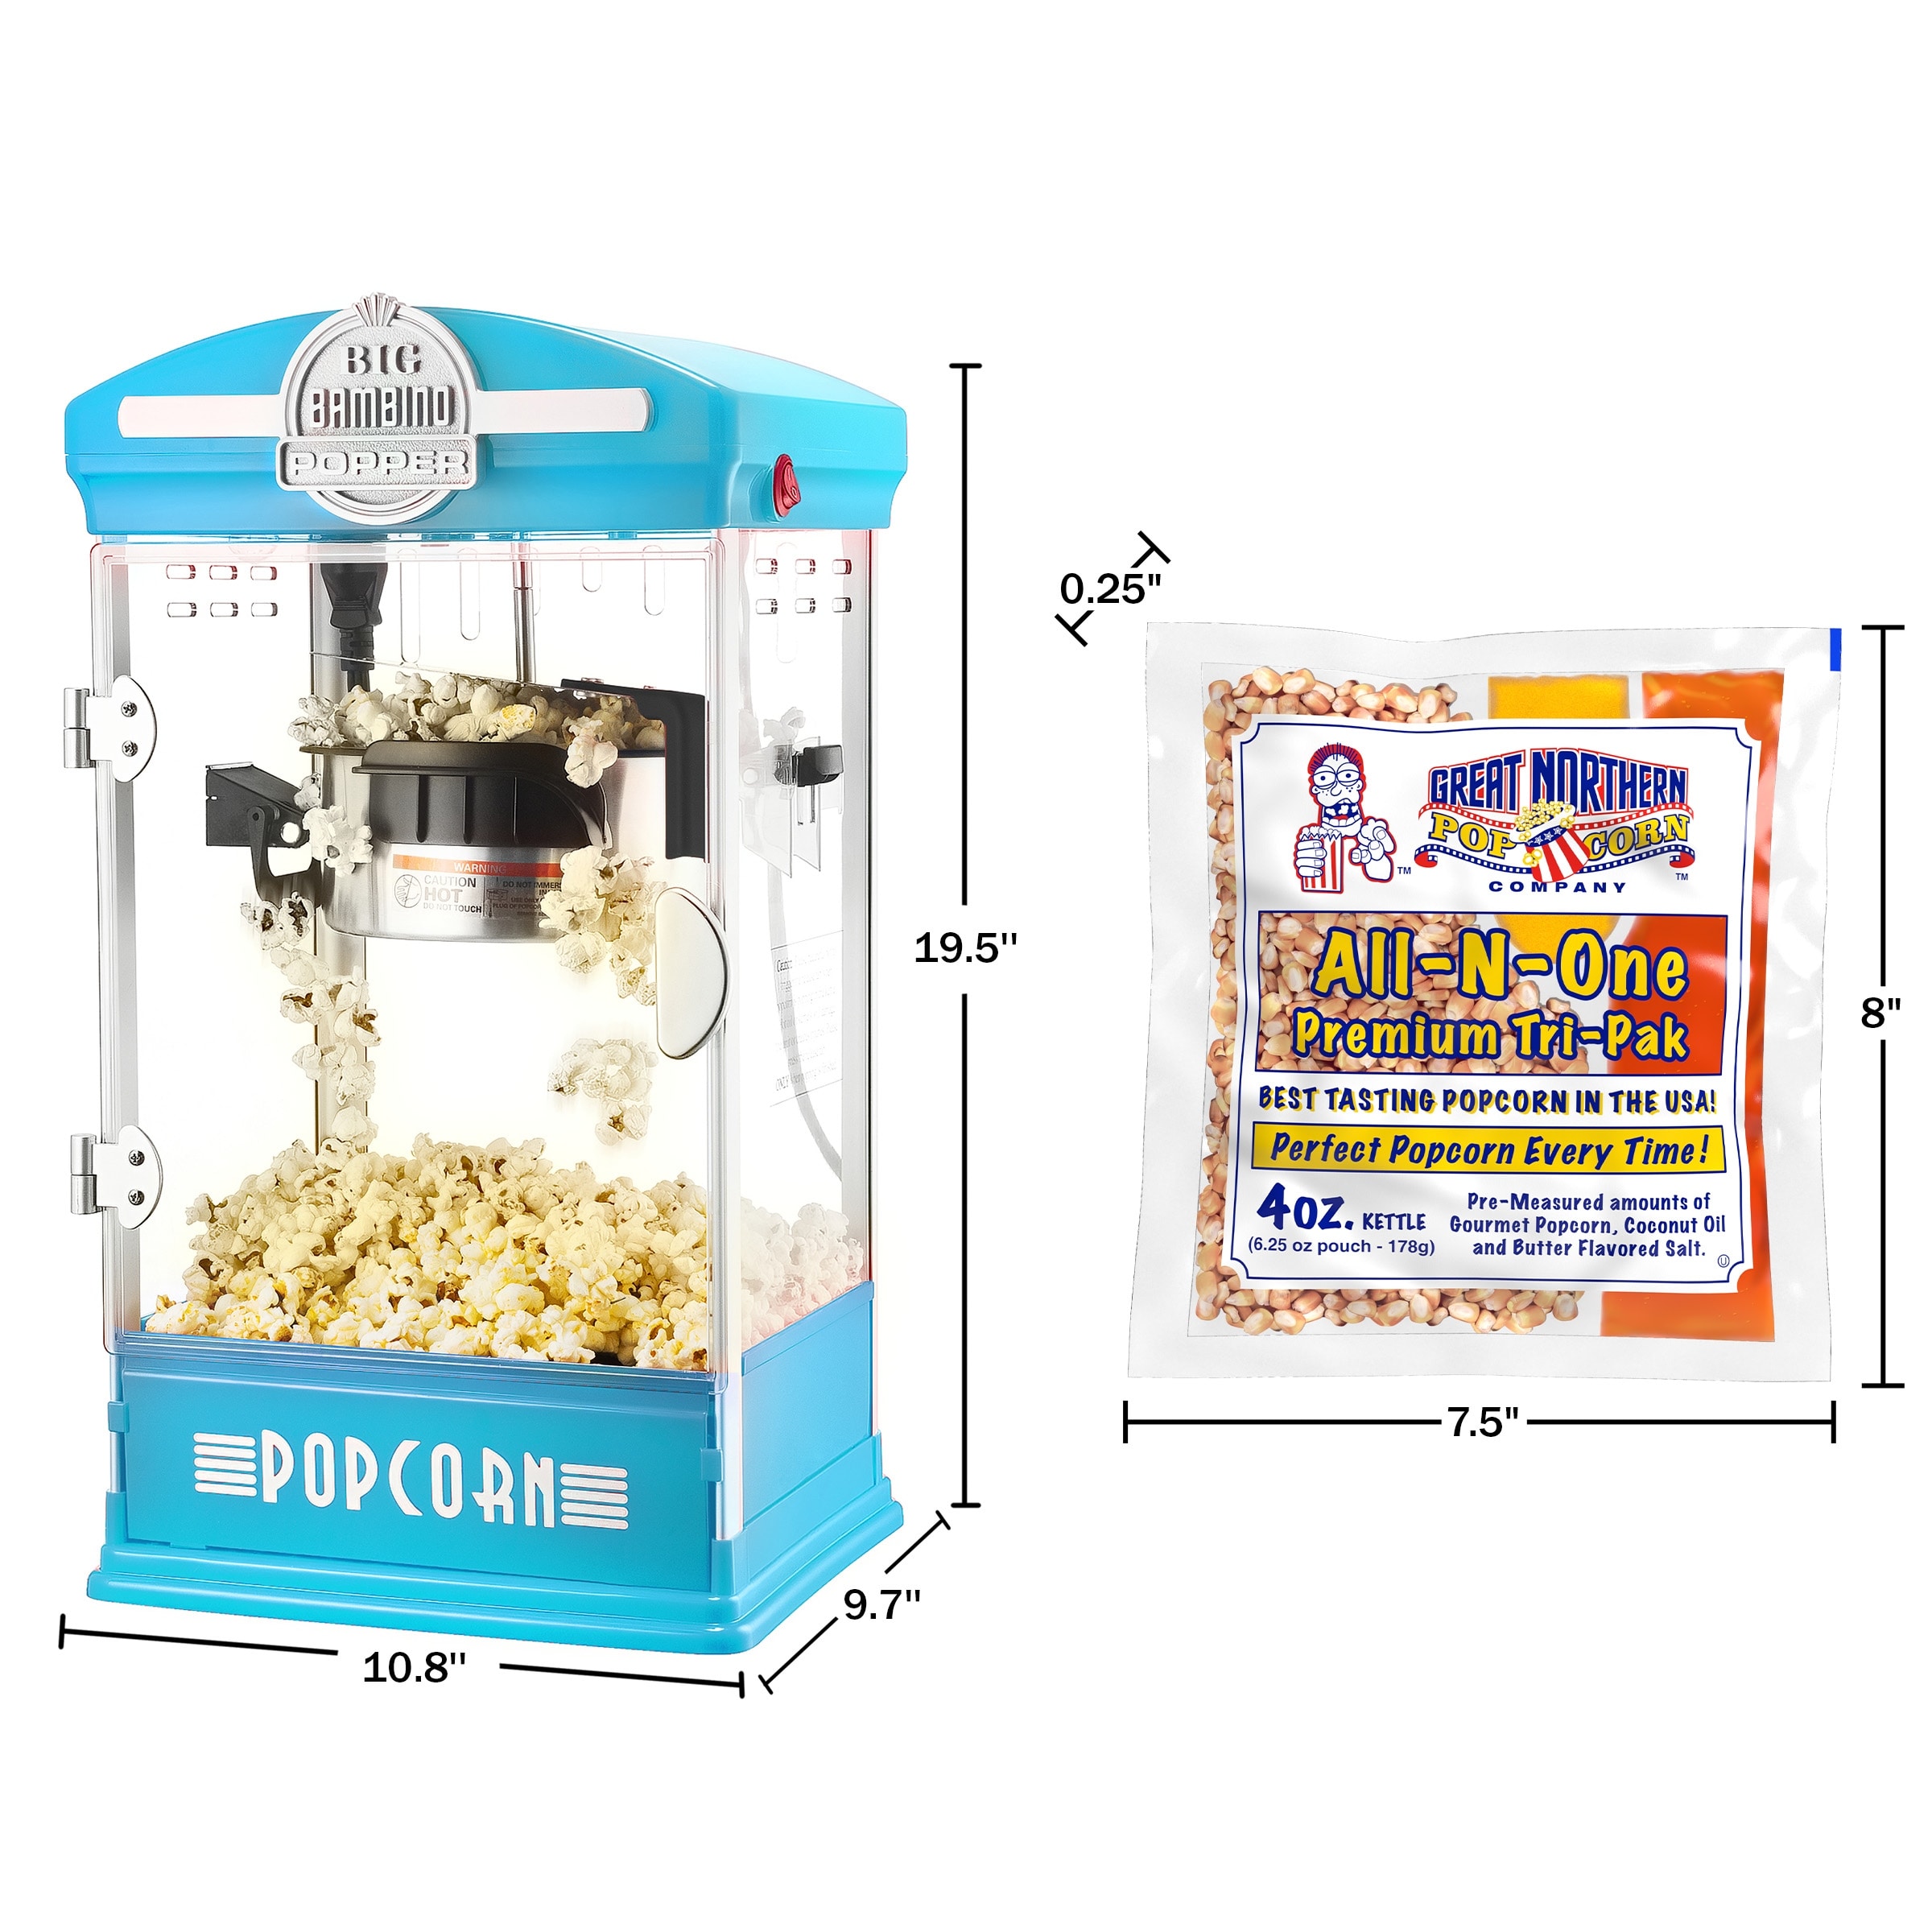 Dare Forbandet Notesbog Big Bambino Popcorn Machine with 12 Pack of All-In-One Popcorn Kernel  Packets by Great Northern Popcorn (Blue) - On Sale - Overstock - 36763303